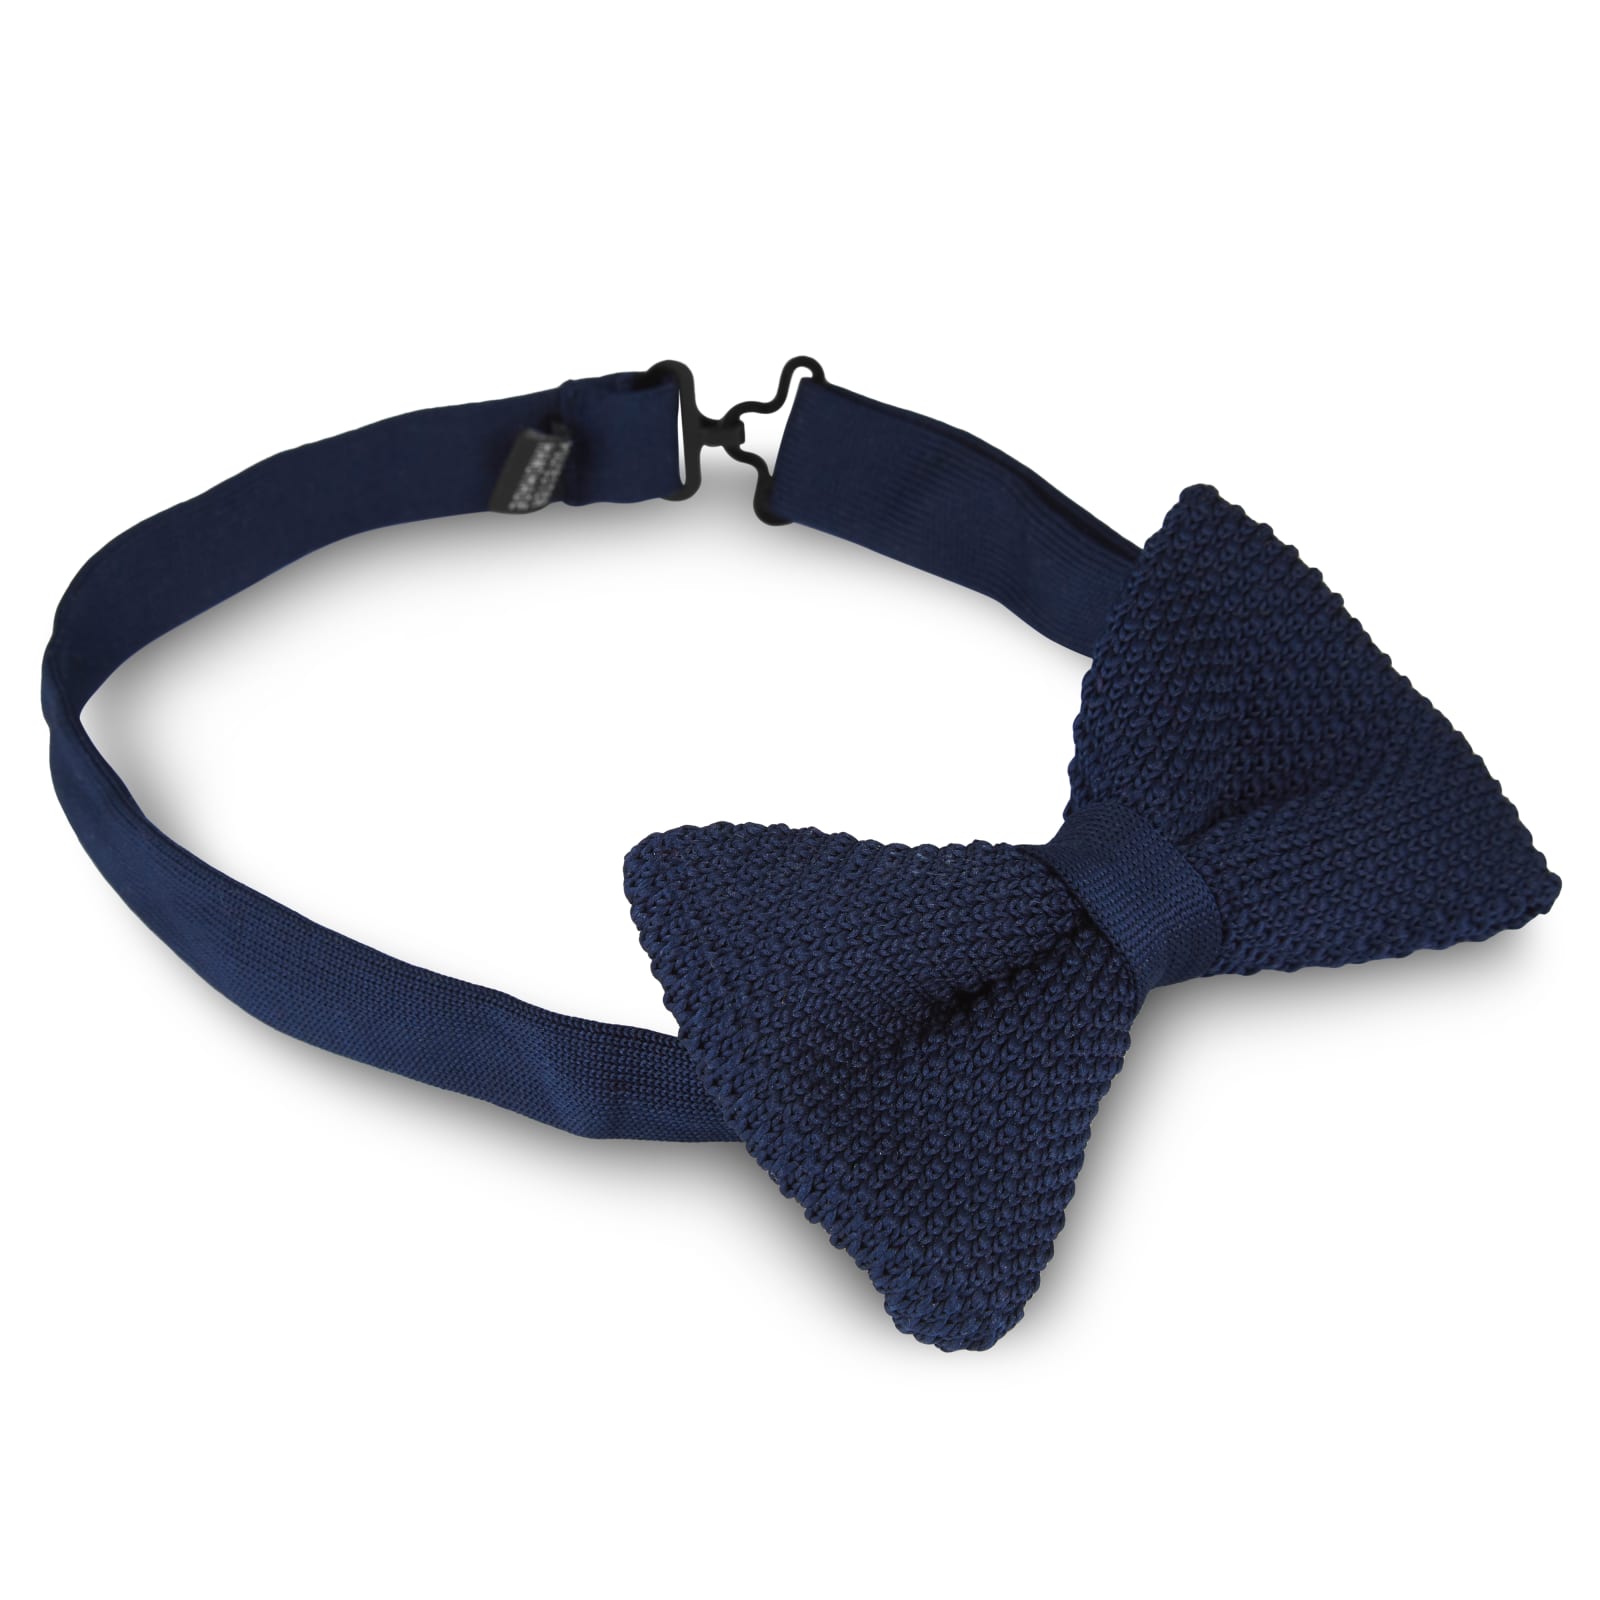 NAVY BLUE KNITTED BOW TIES